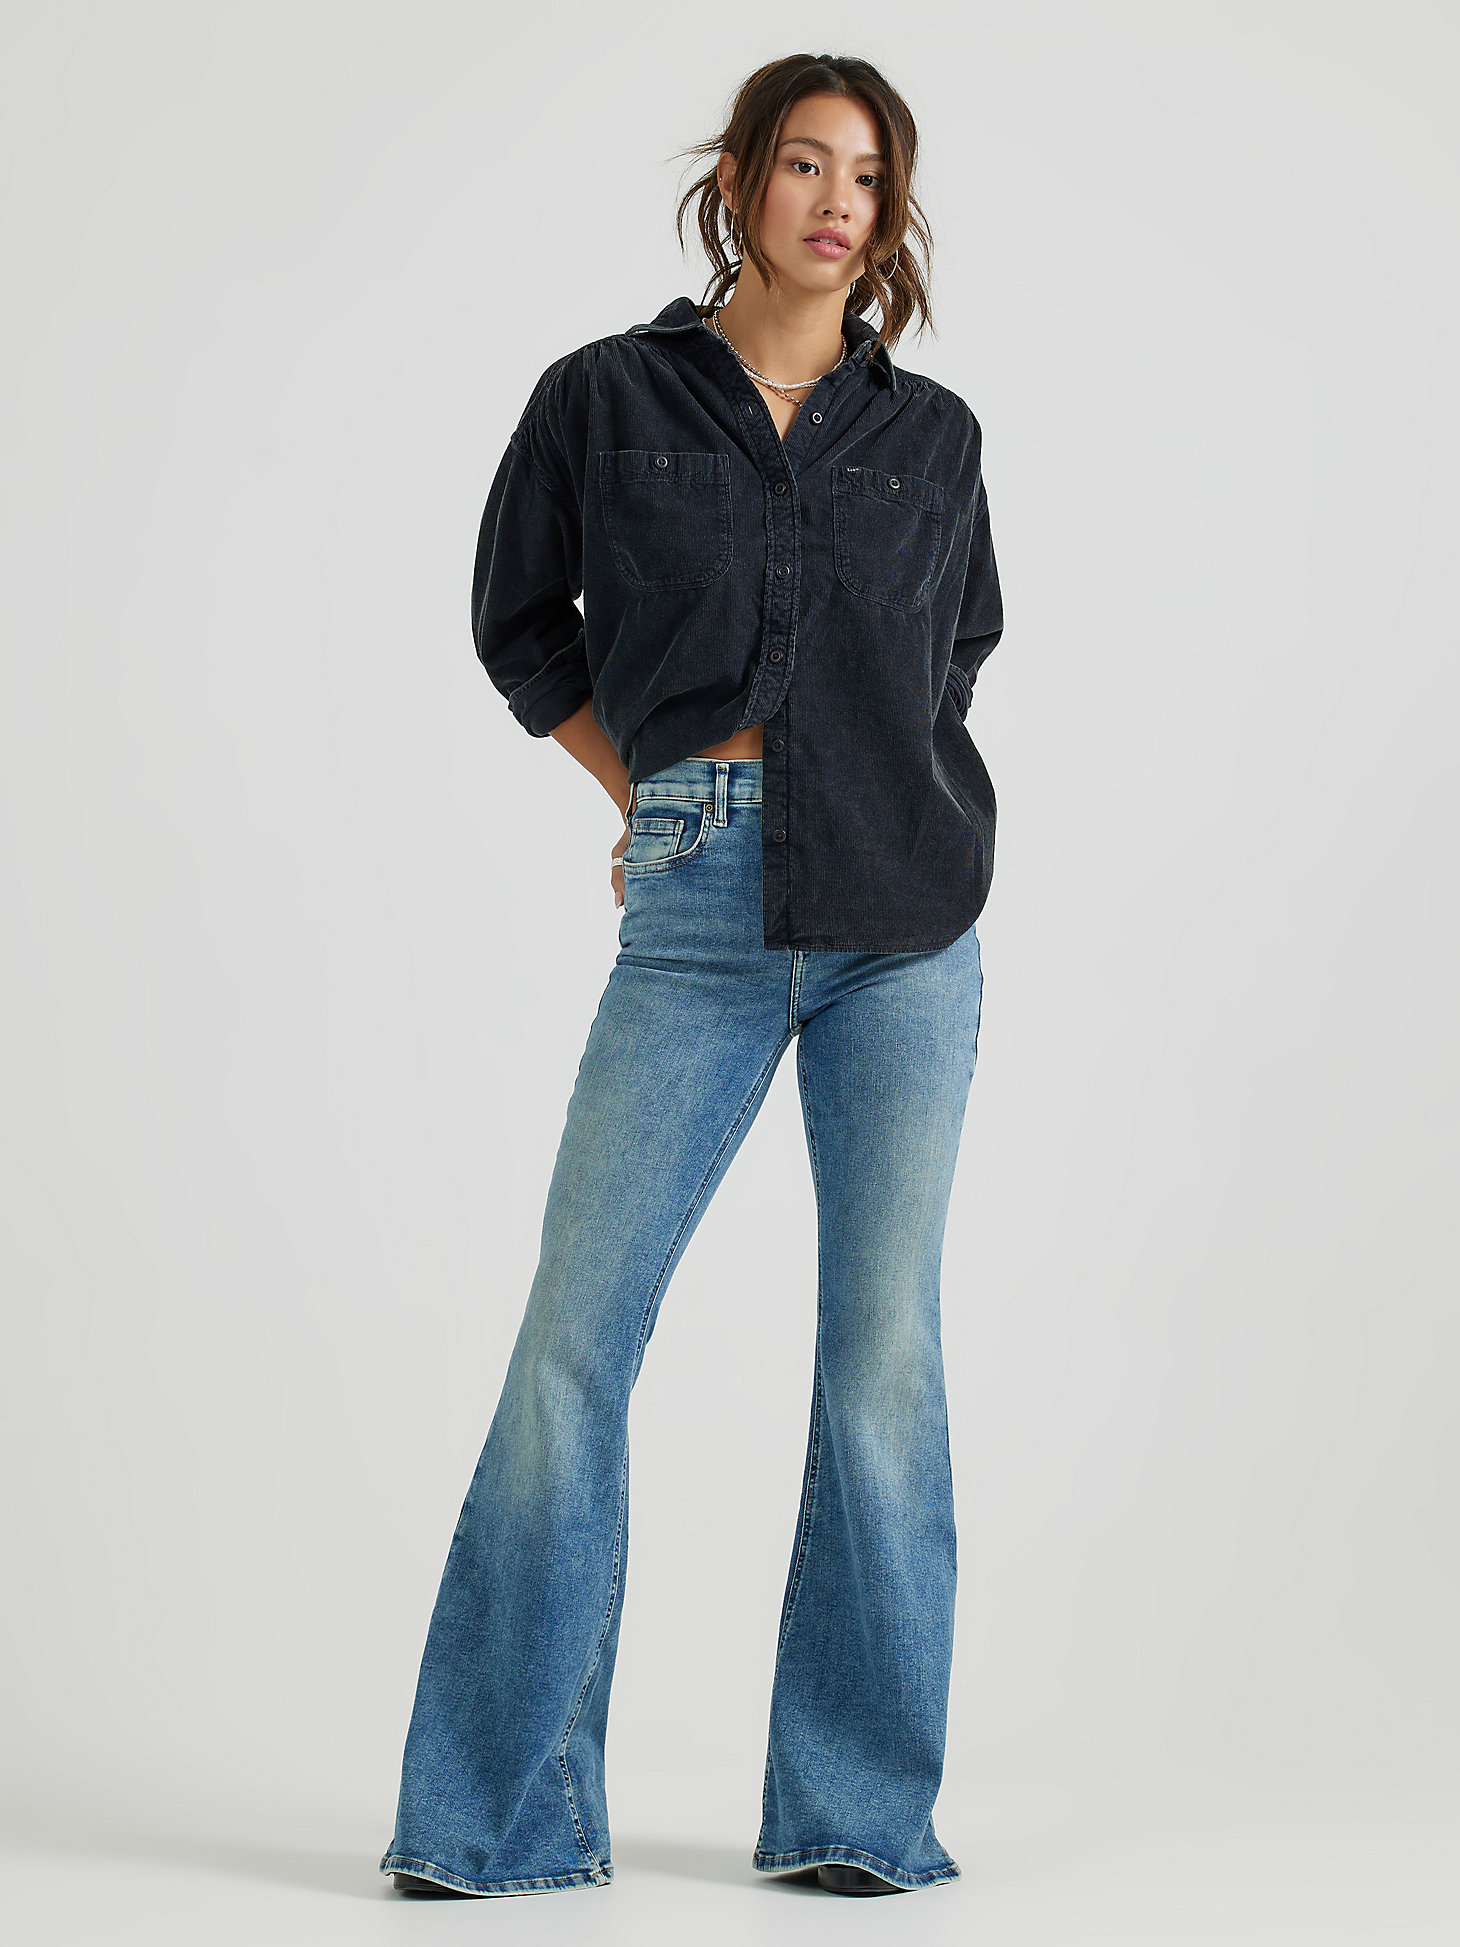 Women's Vintage Modern High Rise Ever Fit™ Flare Jean in Moments of Joy alternative view 1